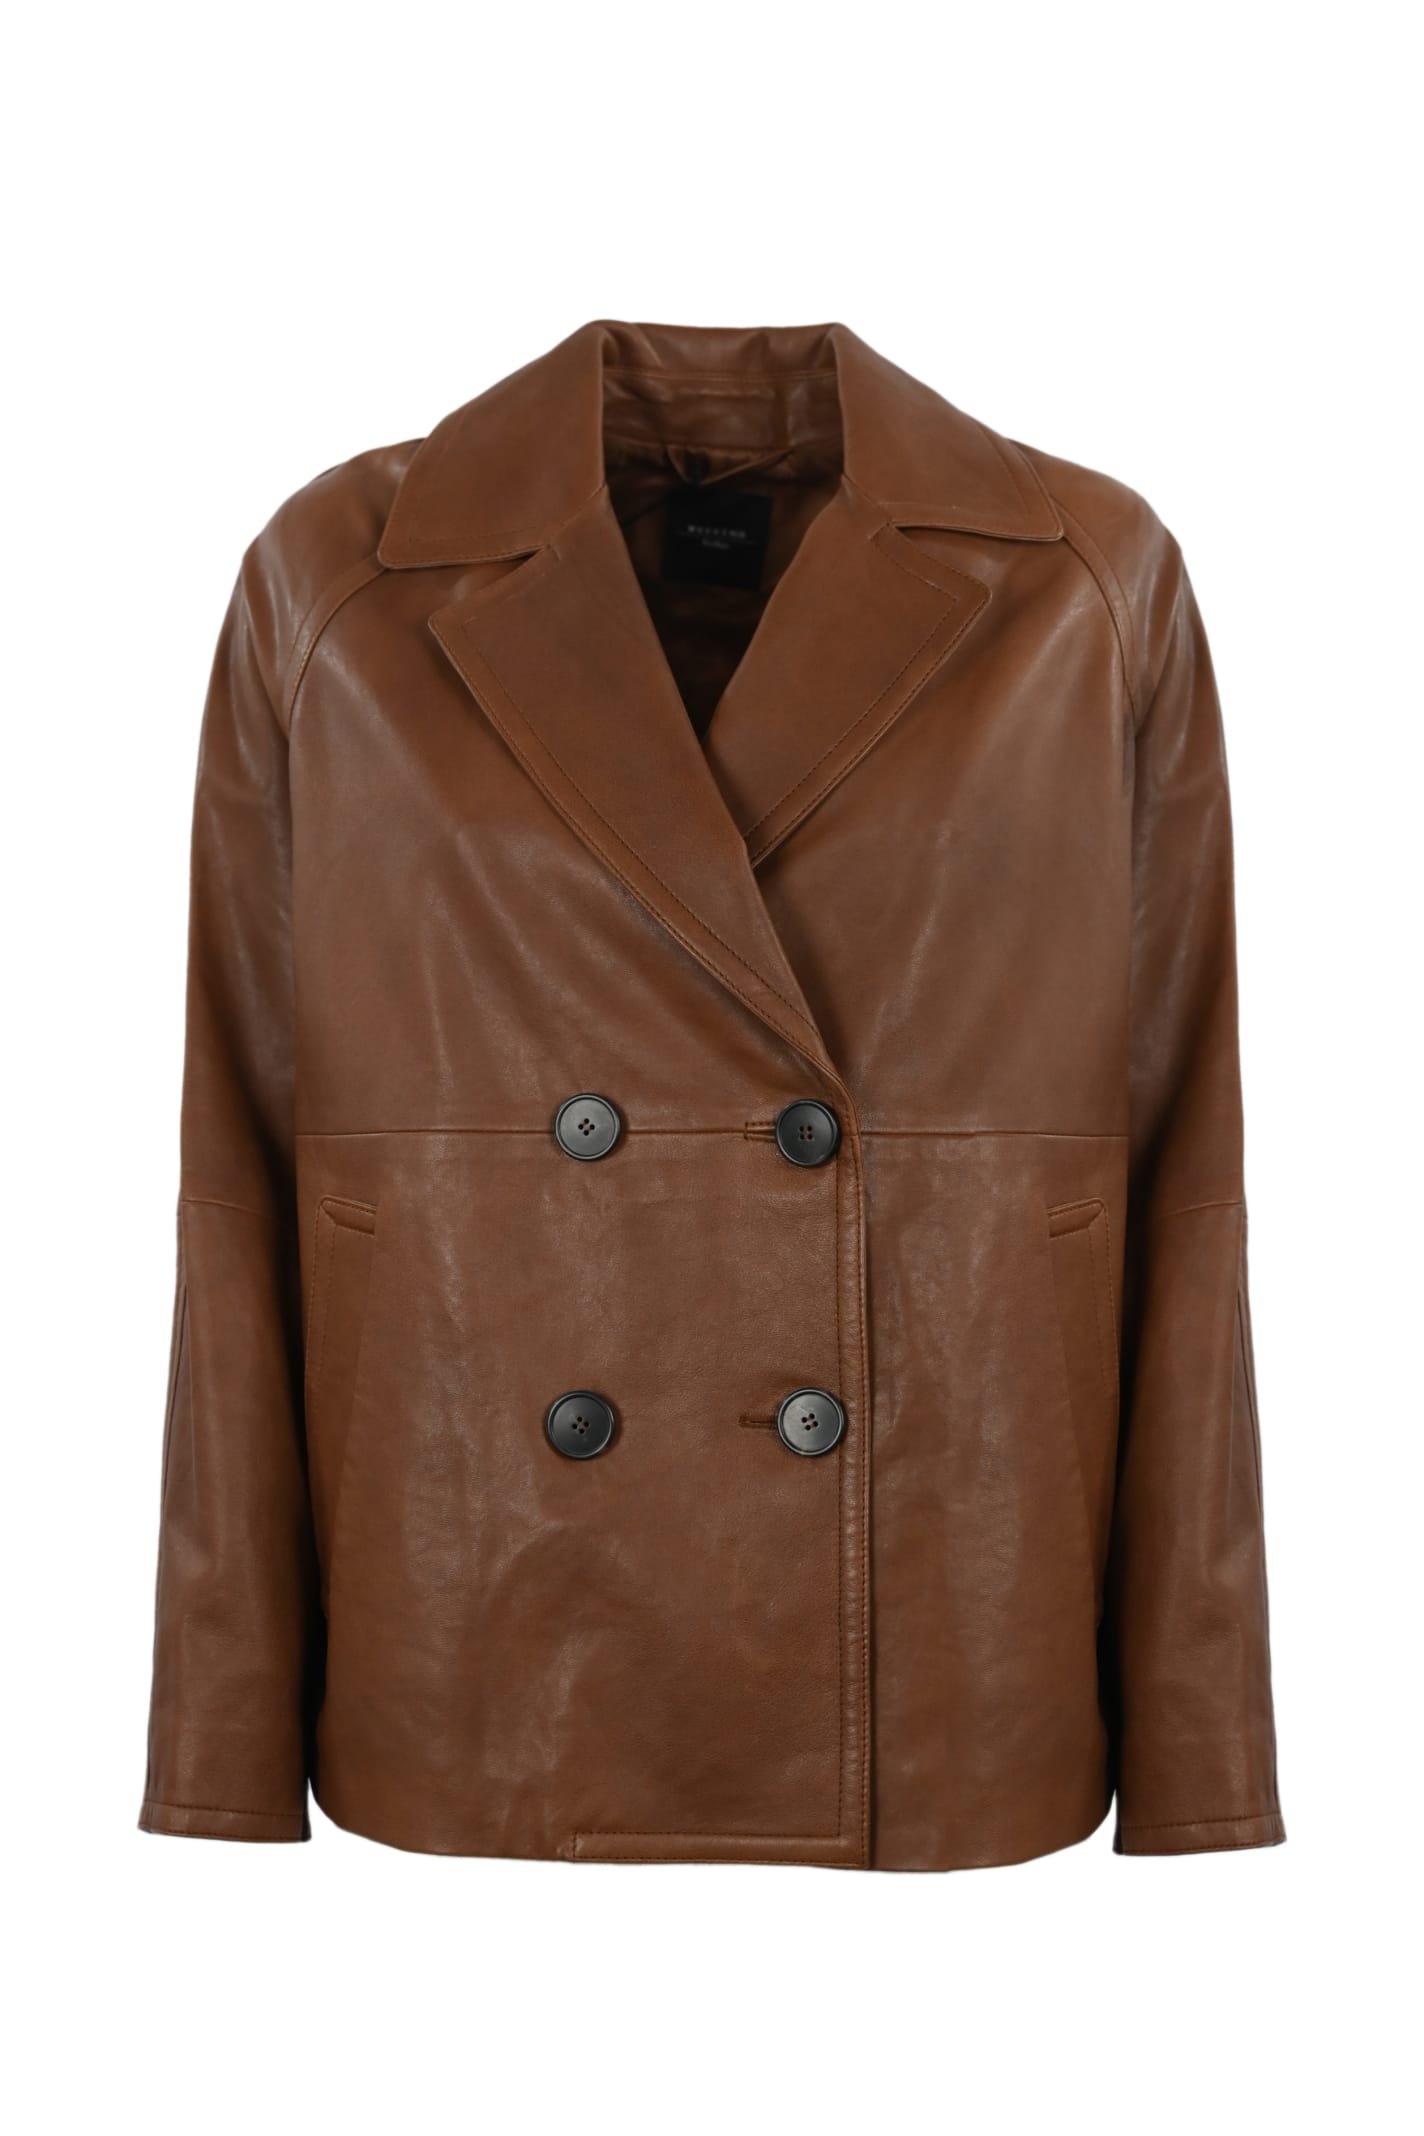 Weekend Max Mara Oria Double-breasted Leather Peacoat In Cuoio